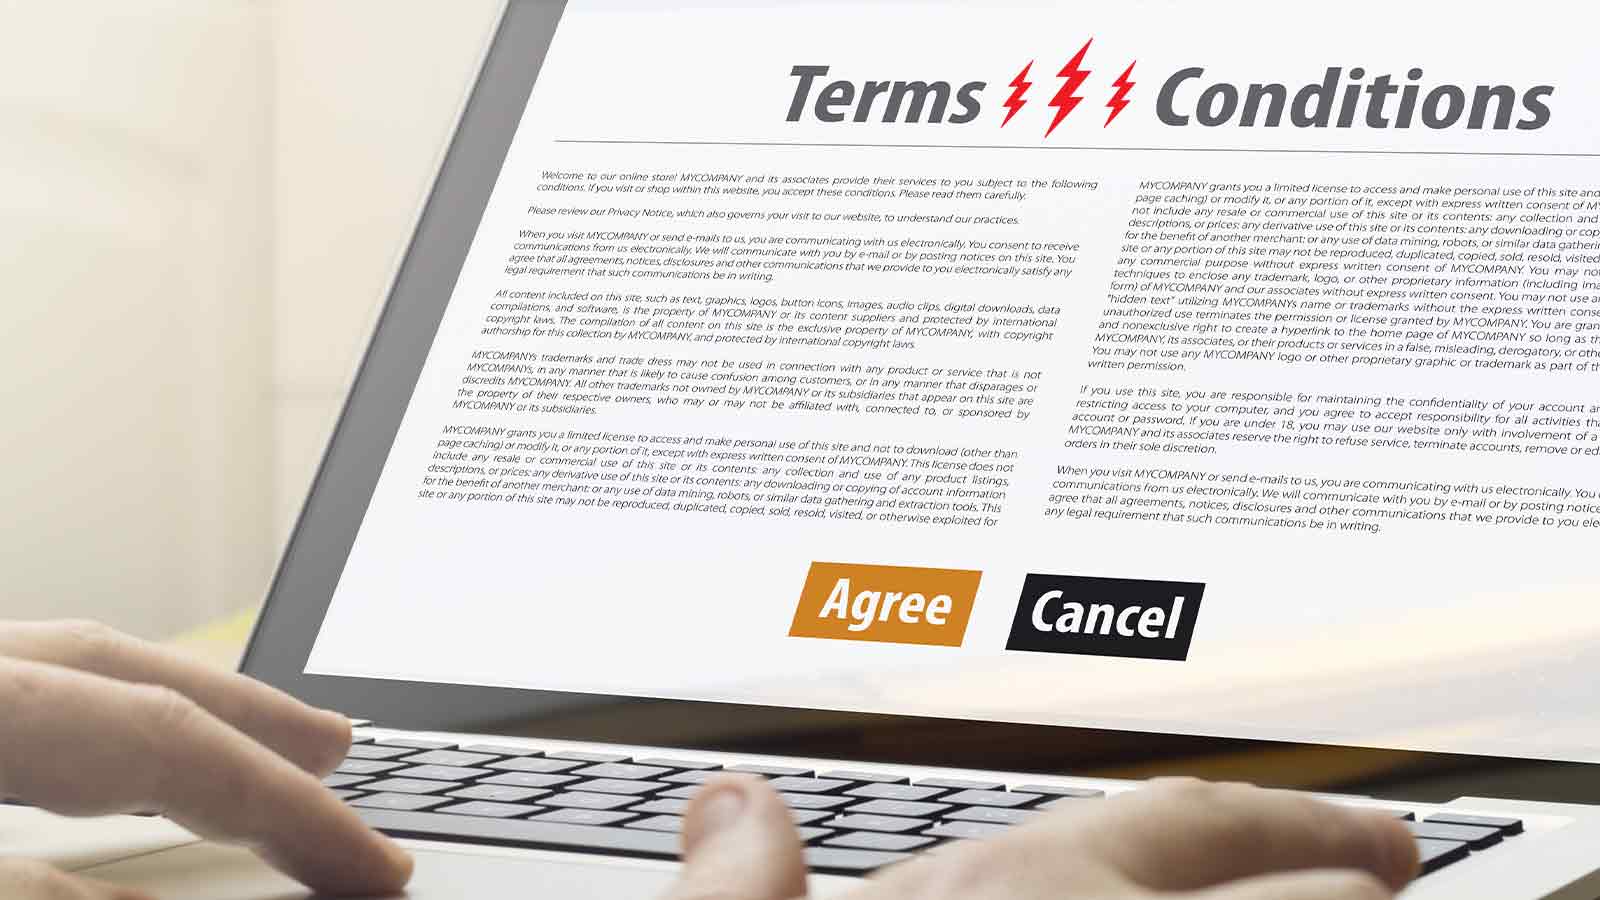 Contrast against the terms and conditions